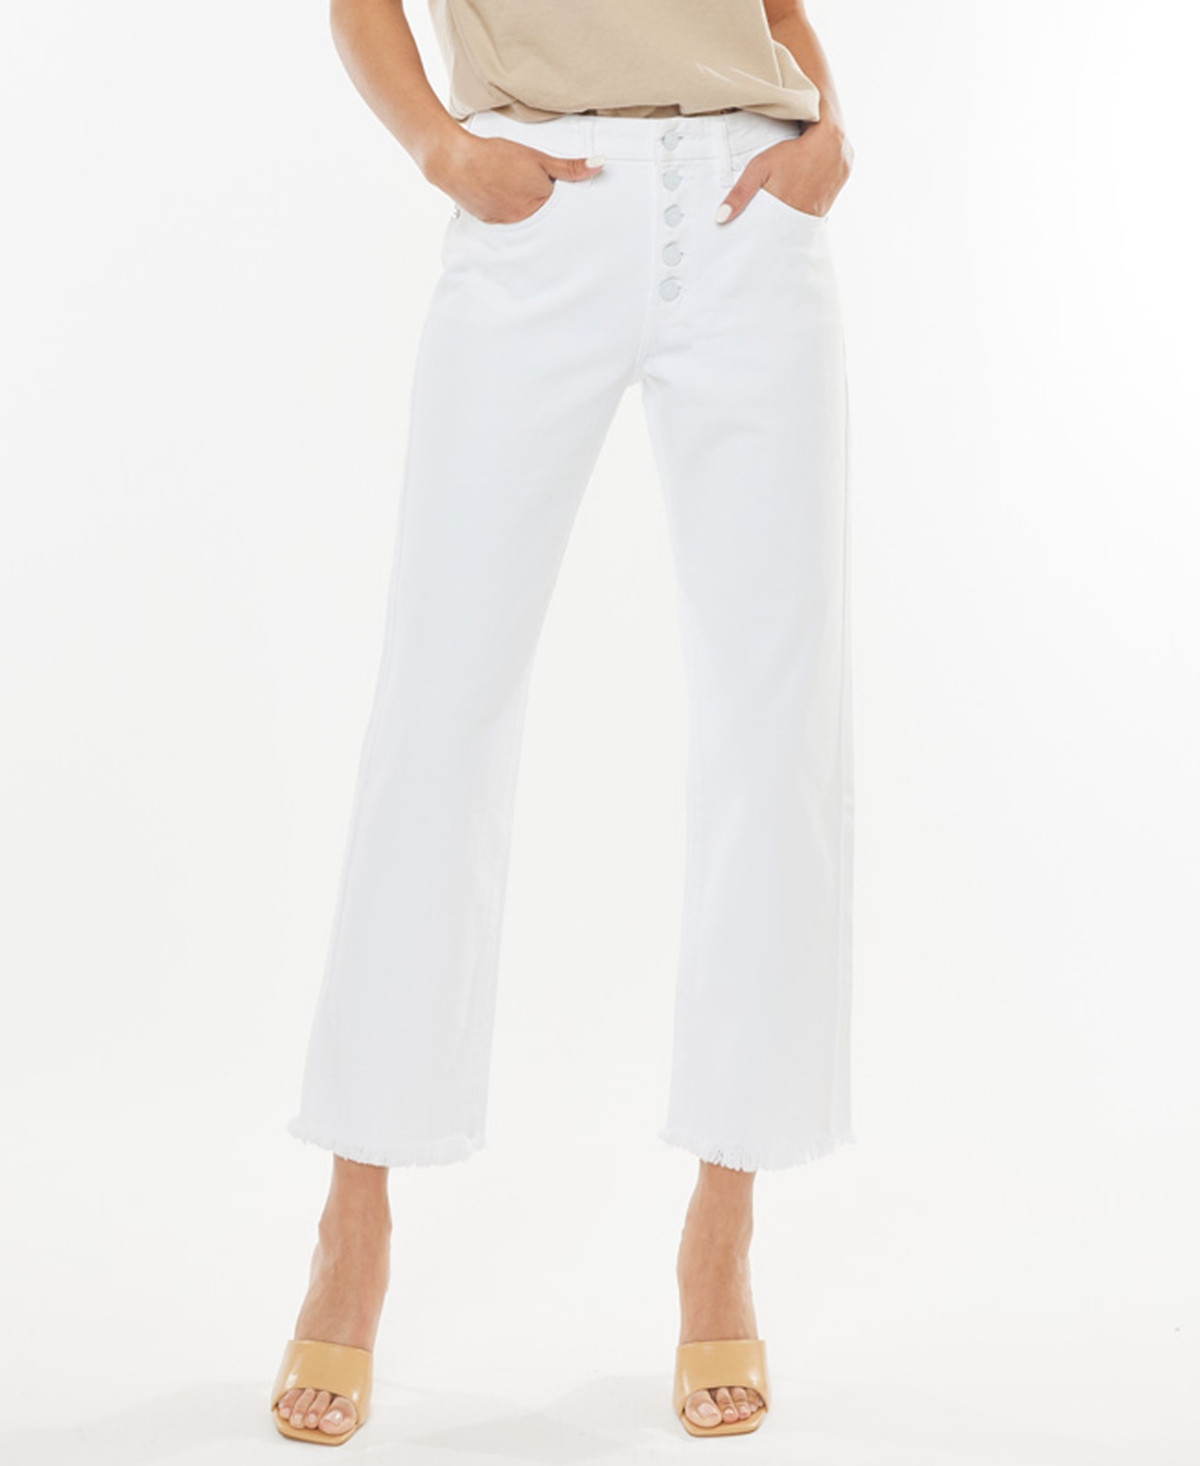 Women's High Rise Straight with Exposed Button Jeans - White